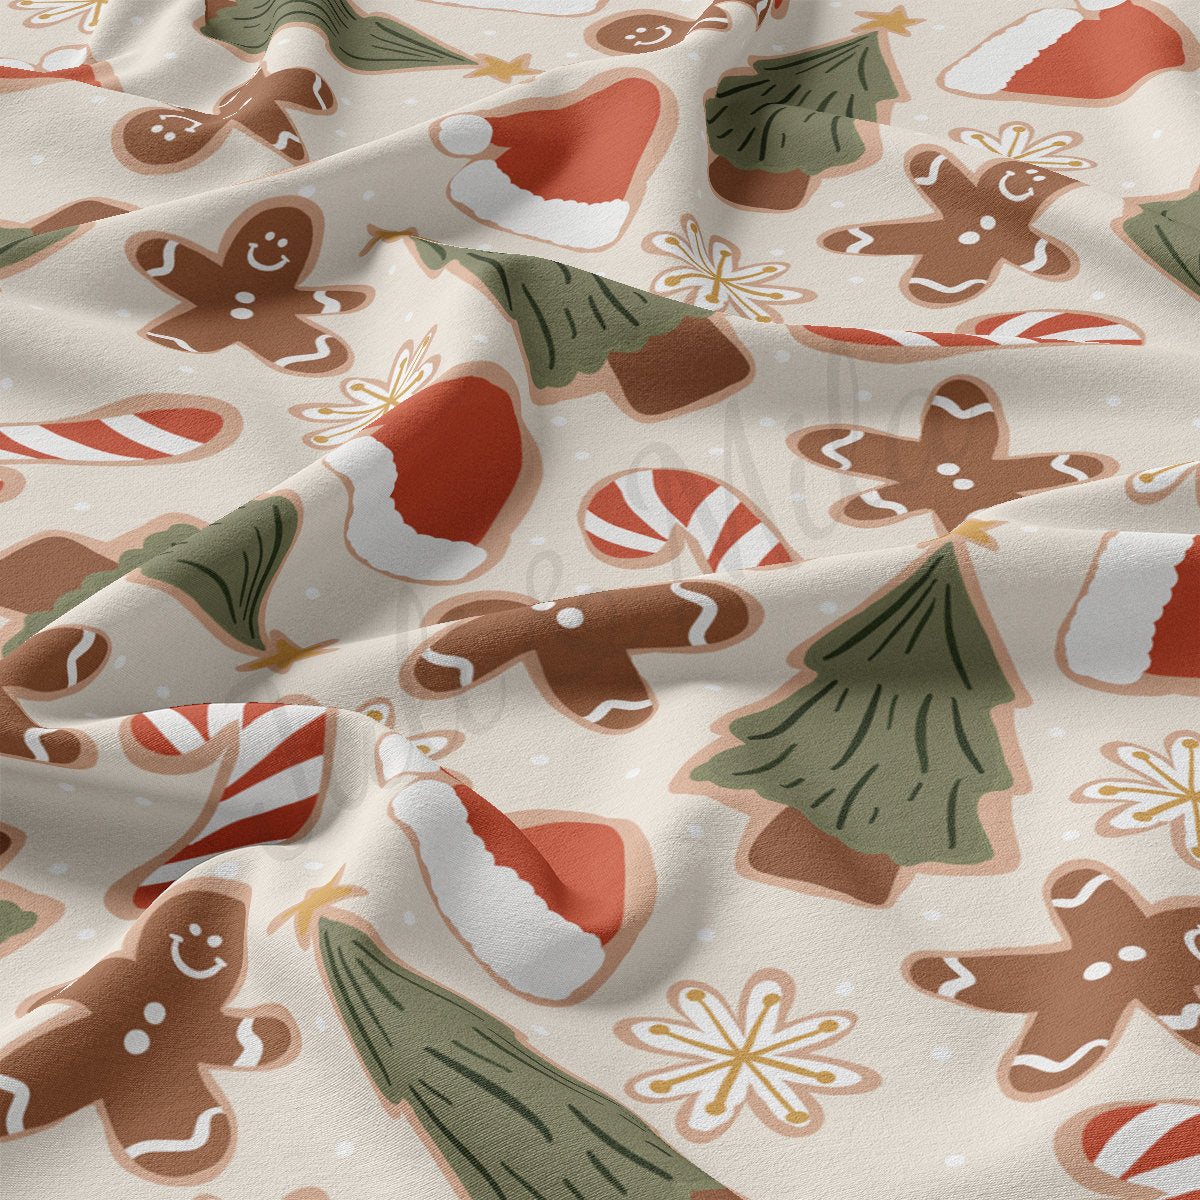 DBP Fabric Double Brushed Polyester DBP2098 Christmas